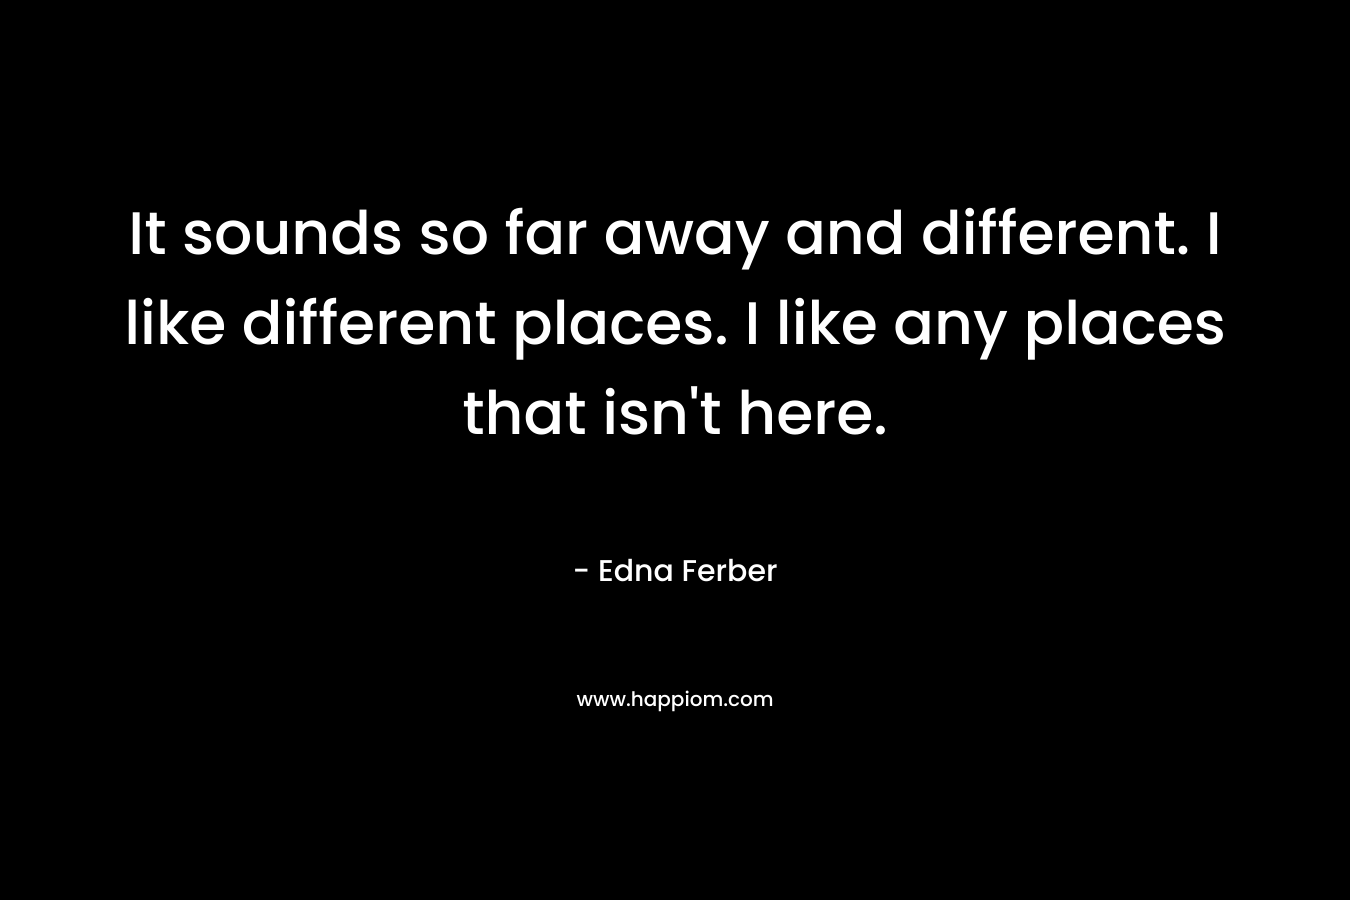 It sounds so far away and different. I like different places. I like any places that isn’t here. – Edna Ferber